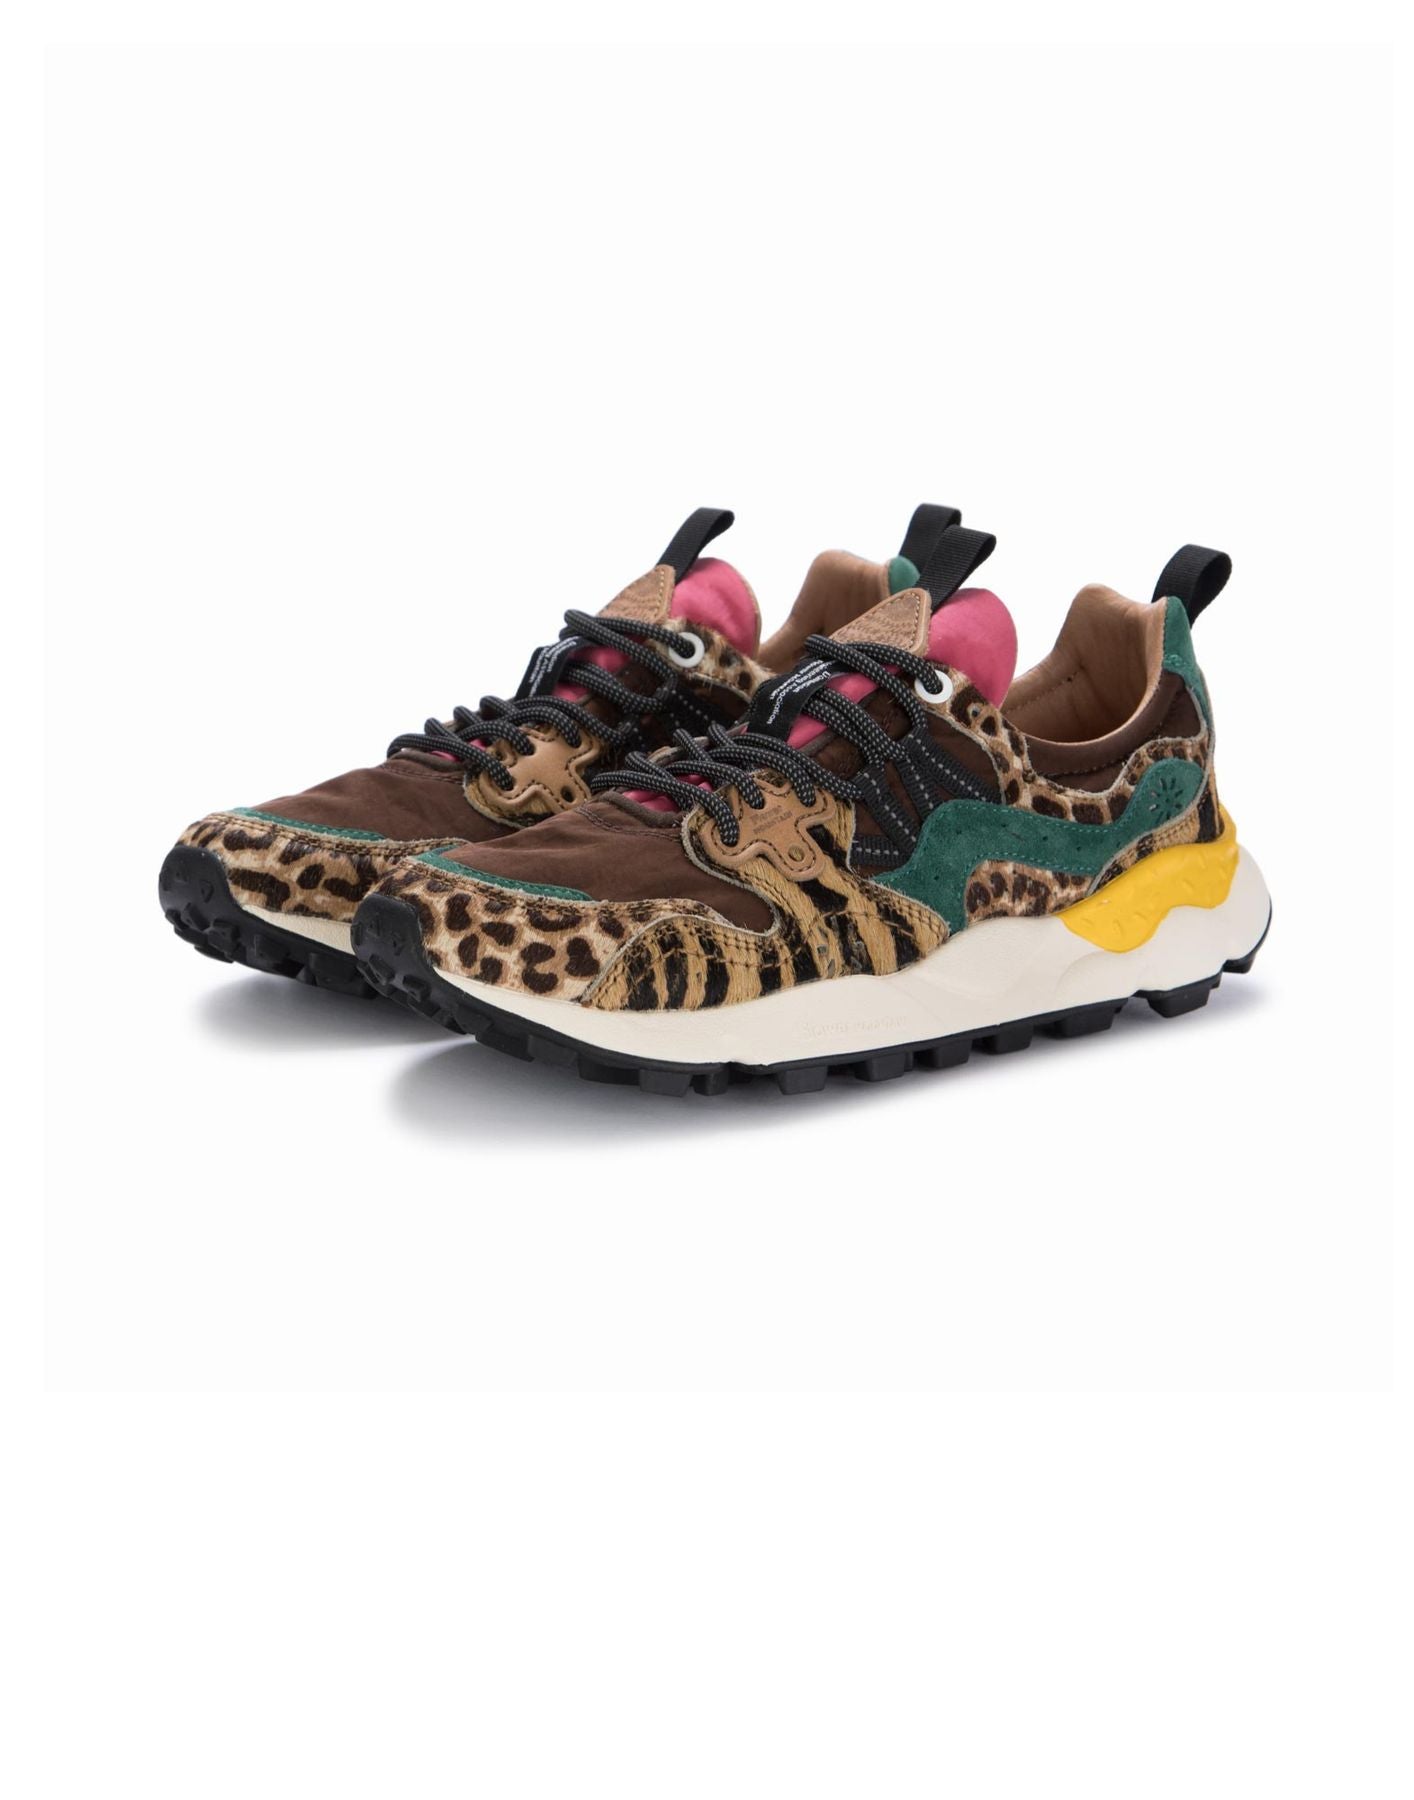 Shoes for woman YAMANO 3 UNI BROWN MULTI Flower Mountain